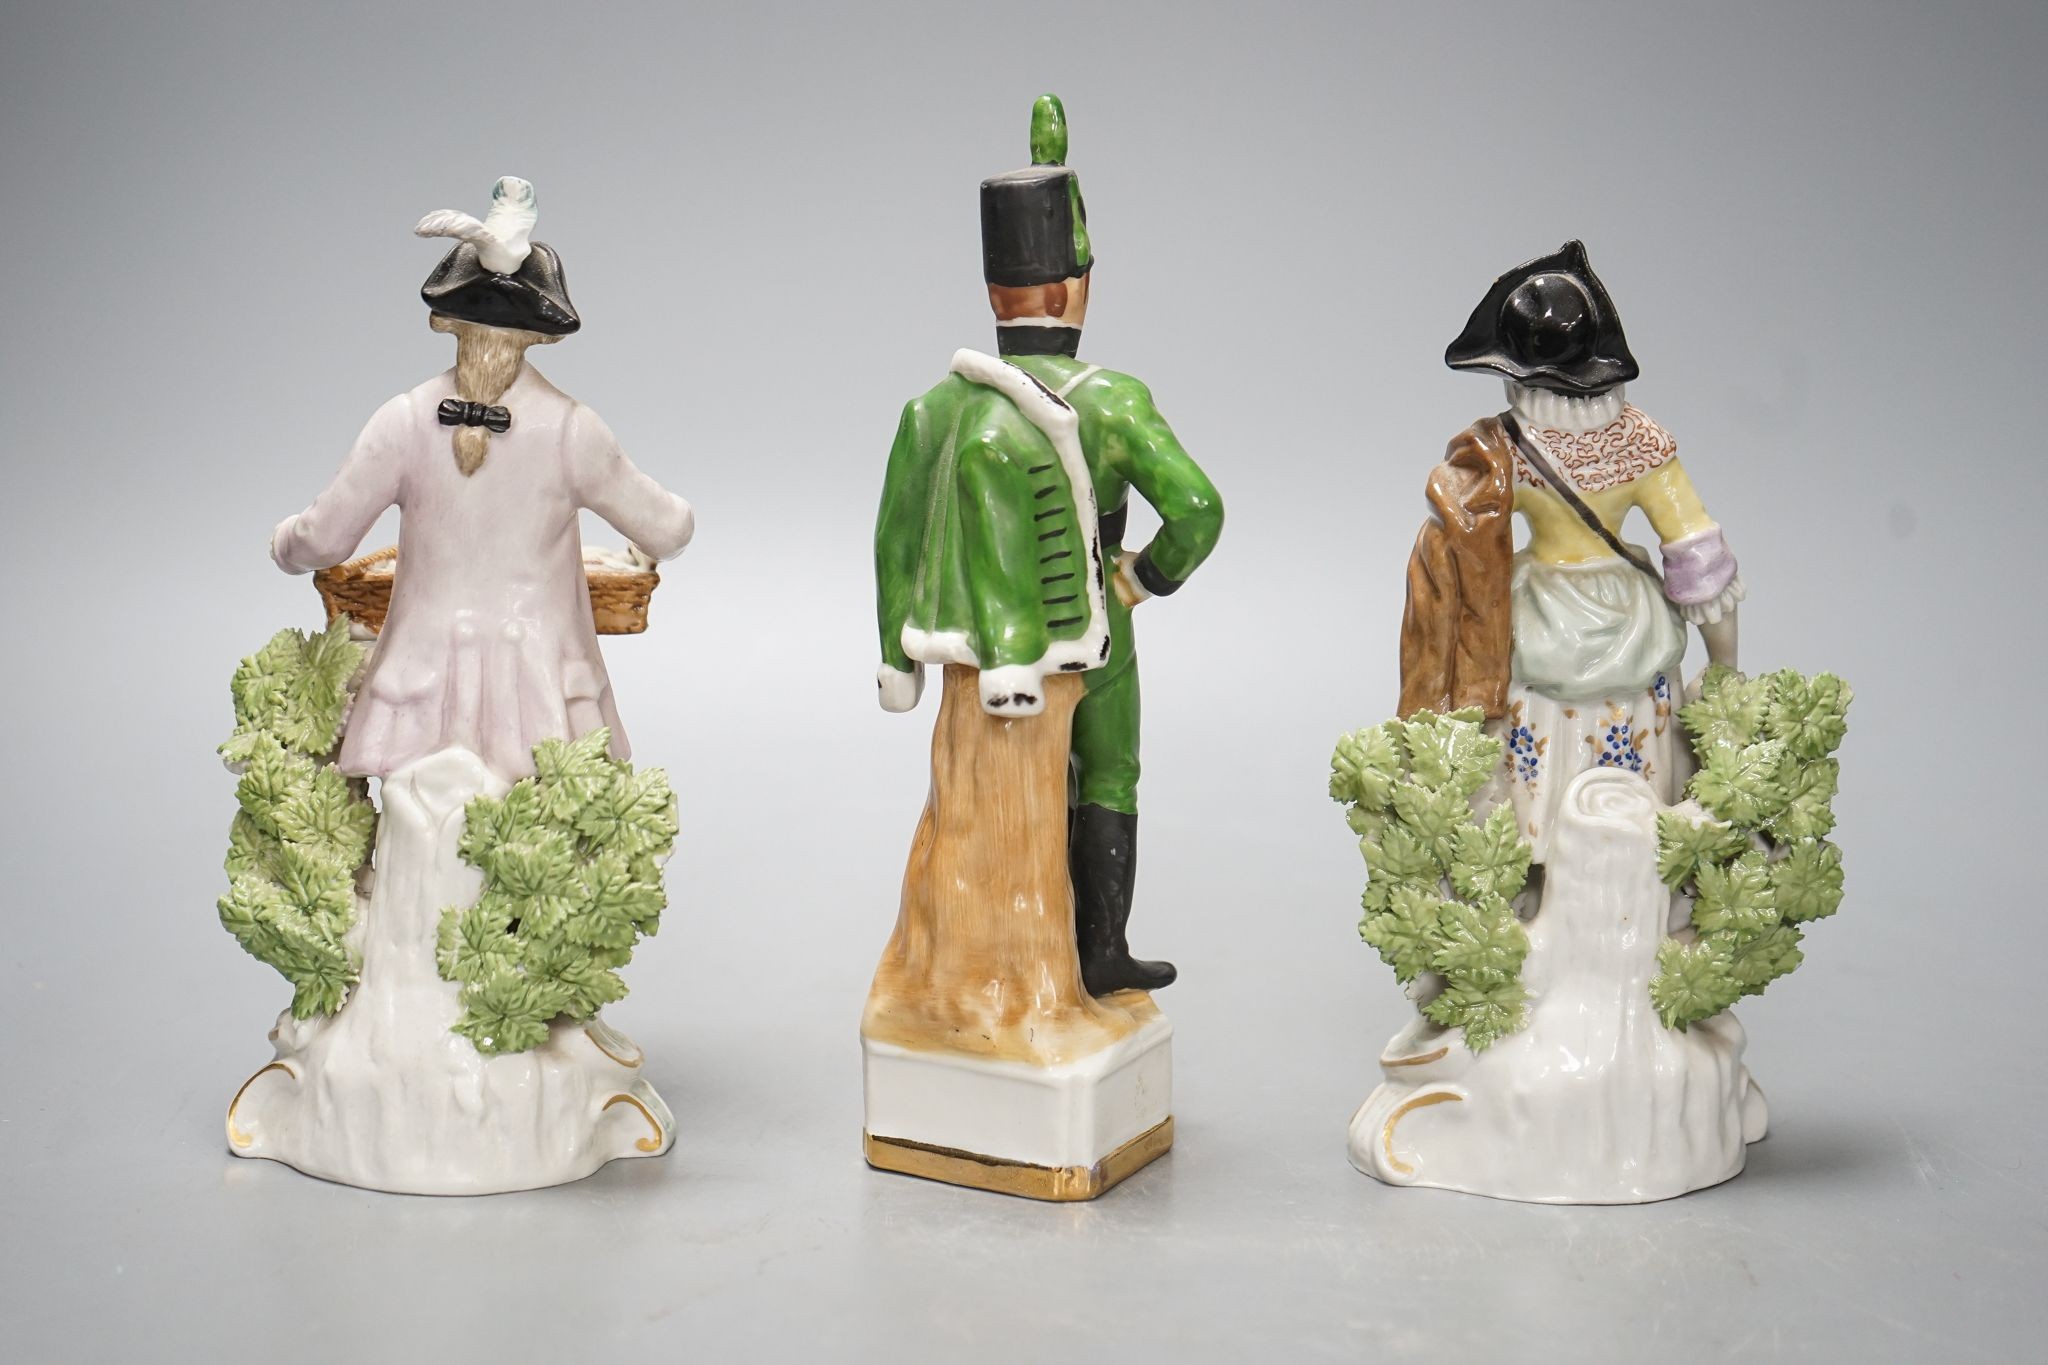 A pair of Dresden porcelain figures of a street-trader and companion and a continental porcelain figure of a Rifle Brigade officer (3) 19.5cm